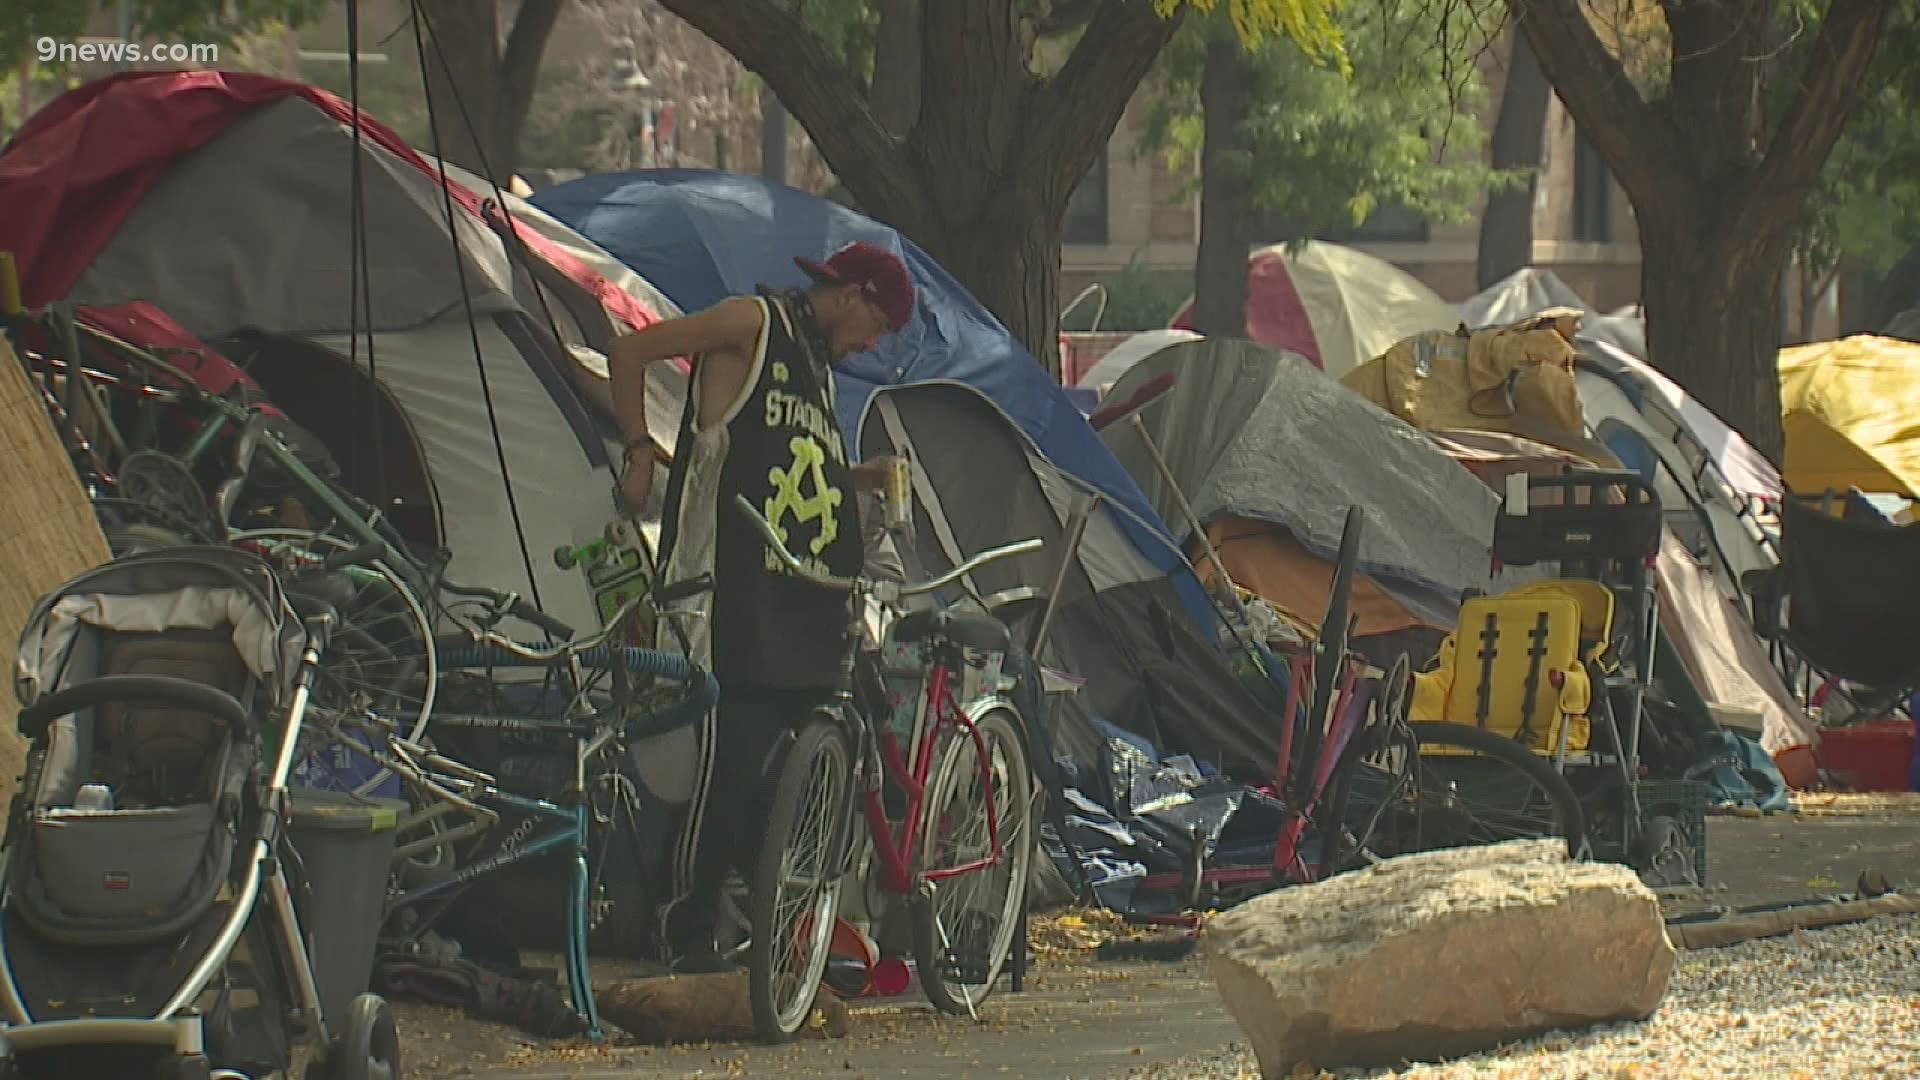 The homeless advocacy group said the city is planning to sweep the camp Tuesday and Wednesday.